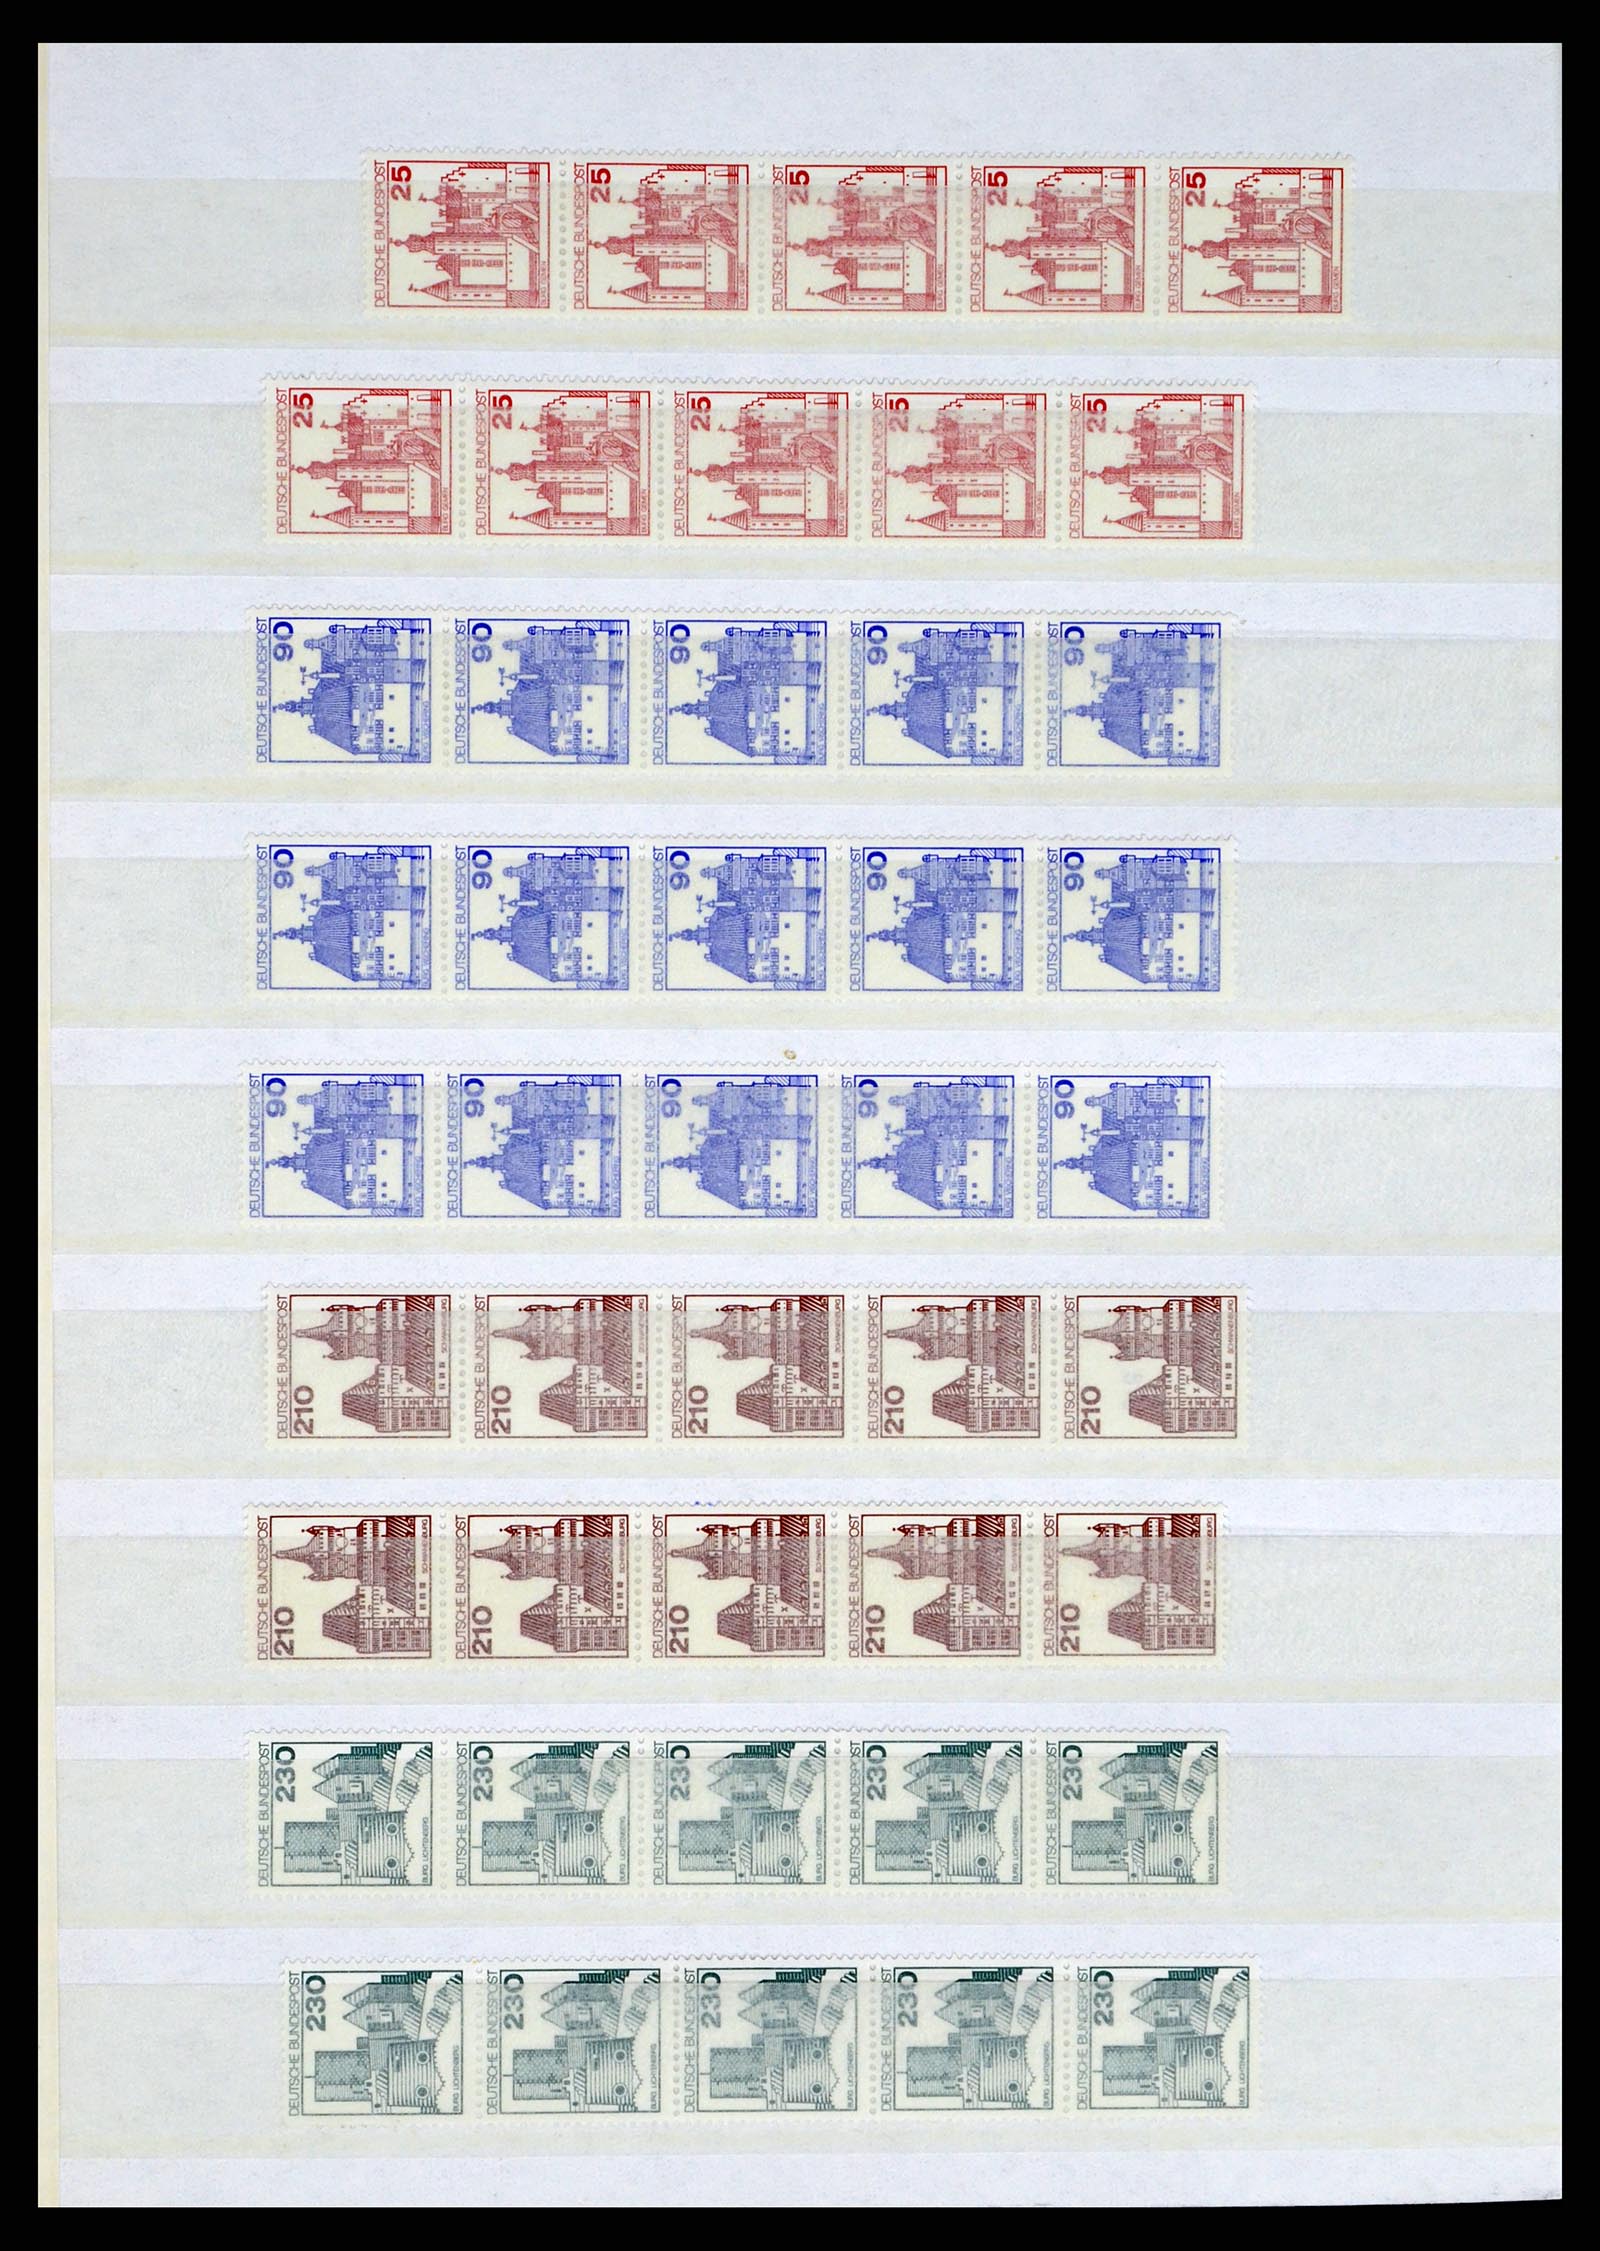 37354 066 - Stamp collection 37354 Bundespost and Berlin 1955-2000.